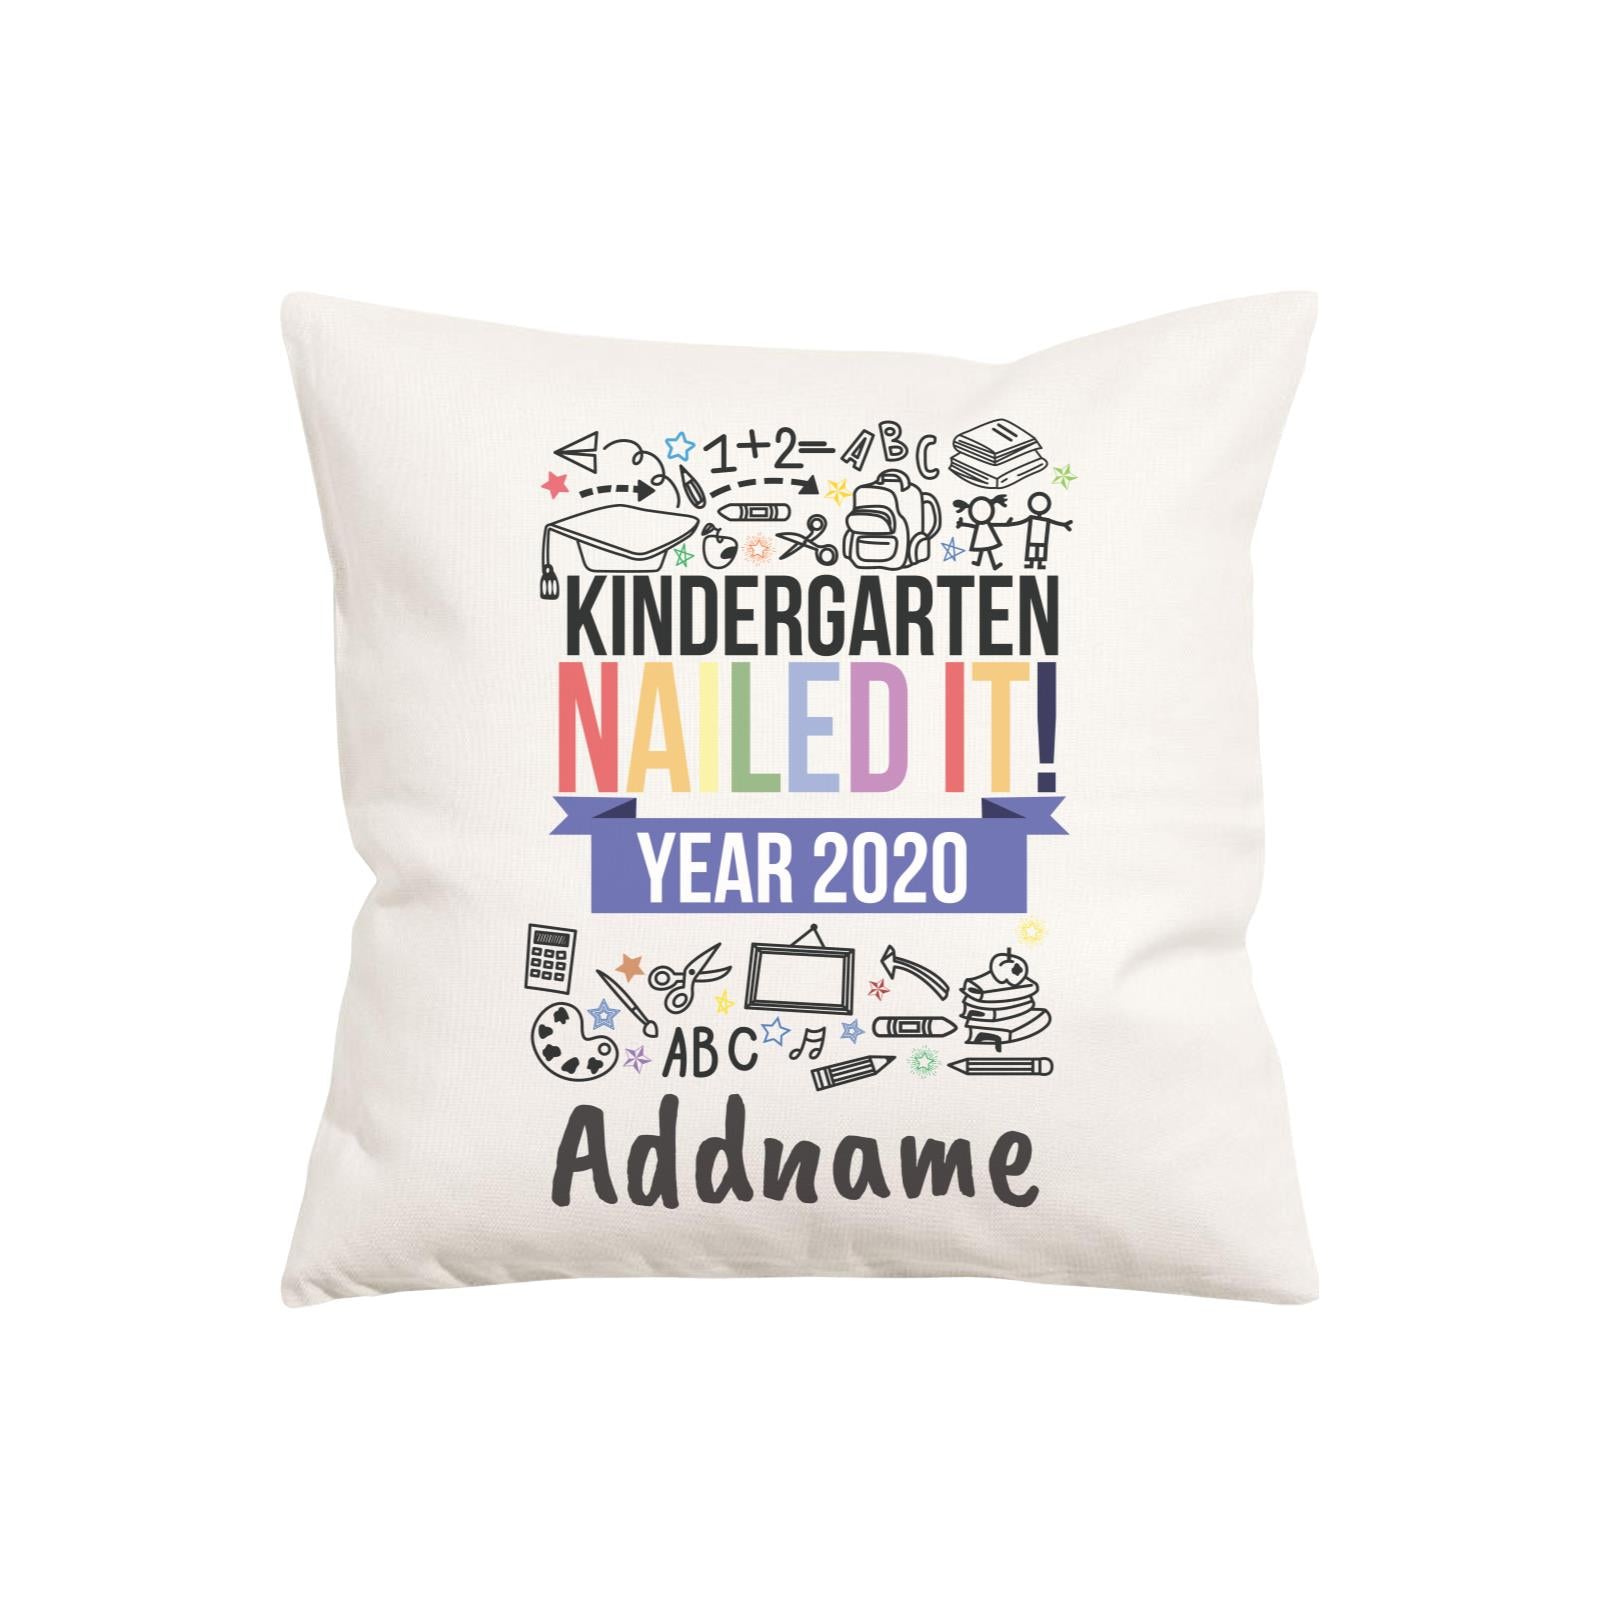 Graduation Series Kindergarten Nailed It Pillow Cushion Cover with Inner Cushion